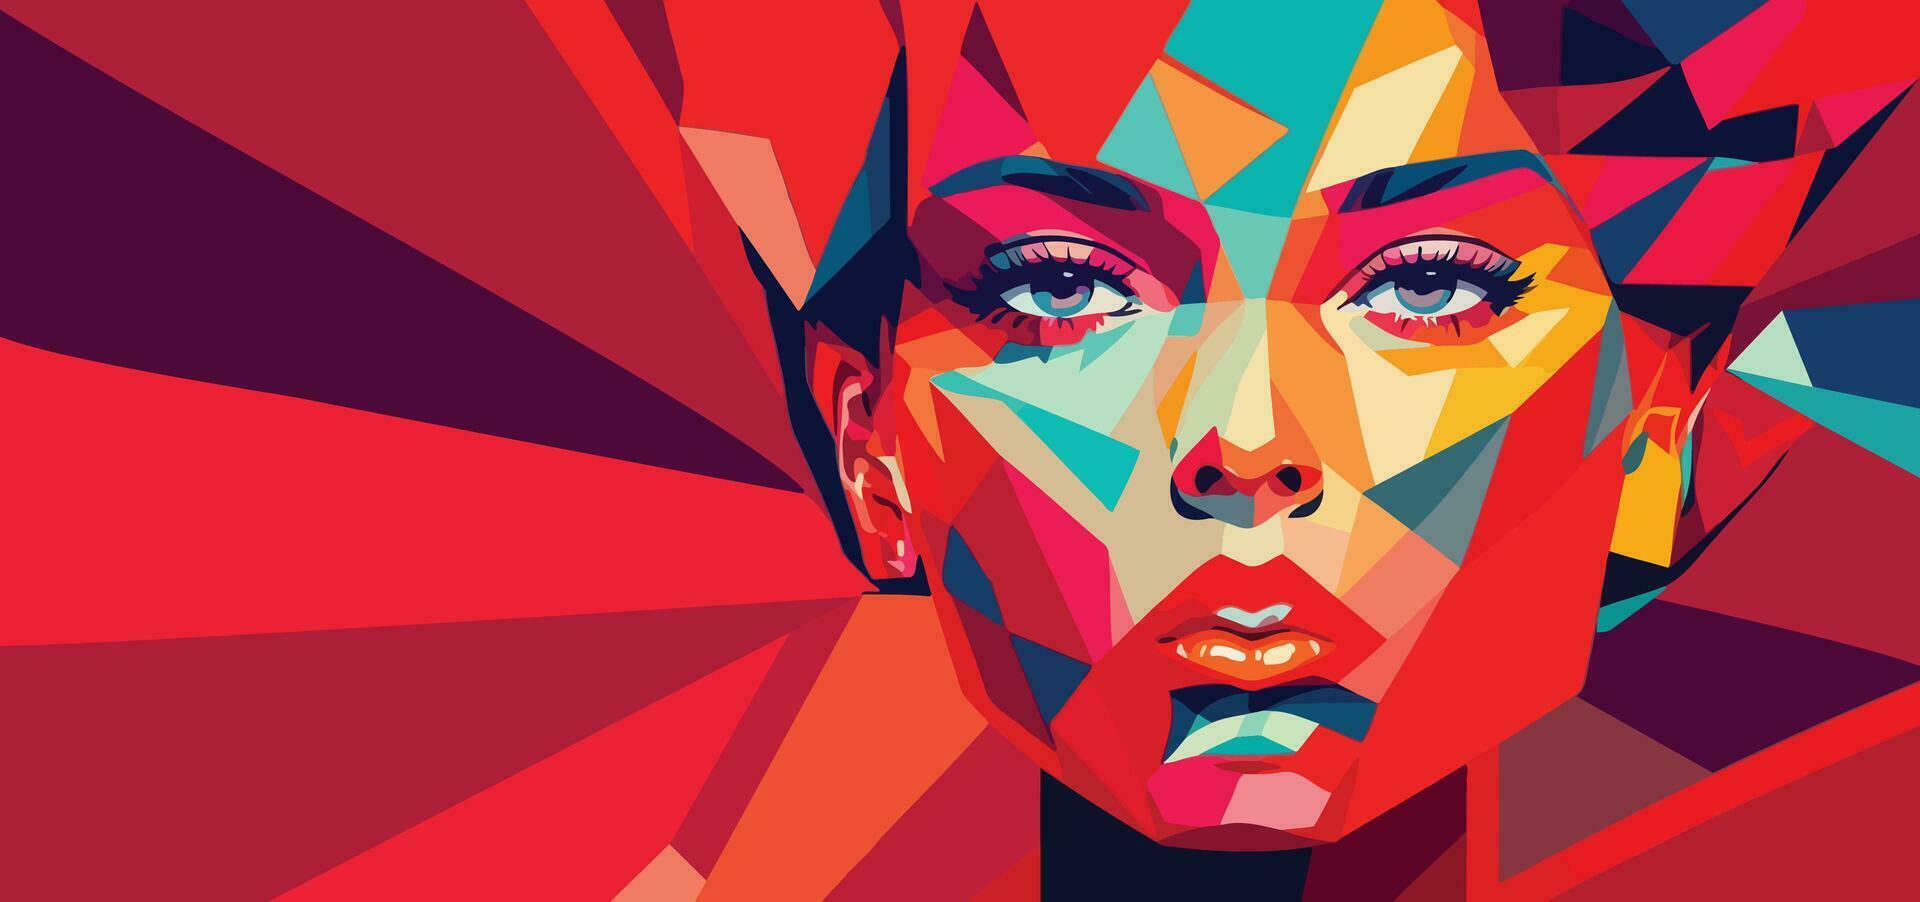 Colorful Female Aesthetic Background Abstract Illustration vector